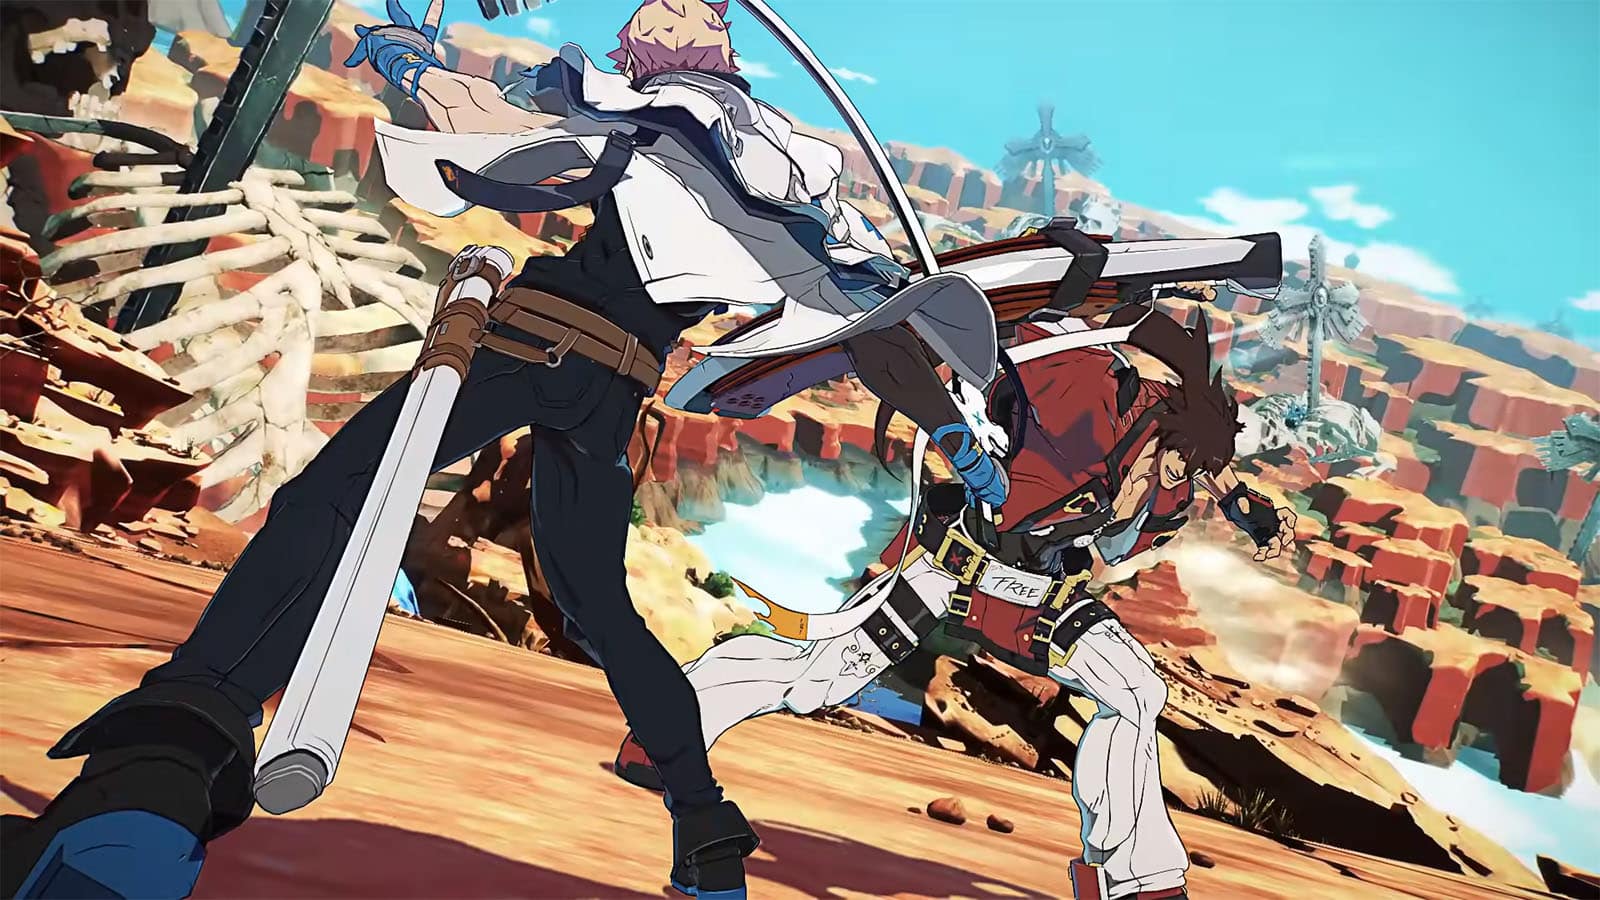 PlayStation-to-PC cross-play for Guilty Gear Strive to be explored